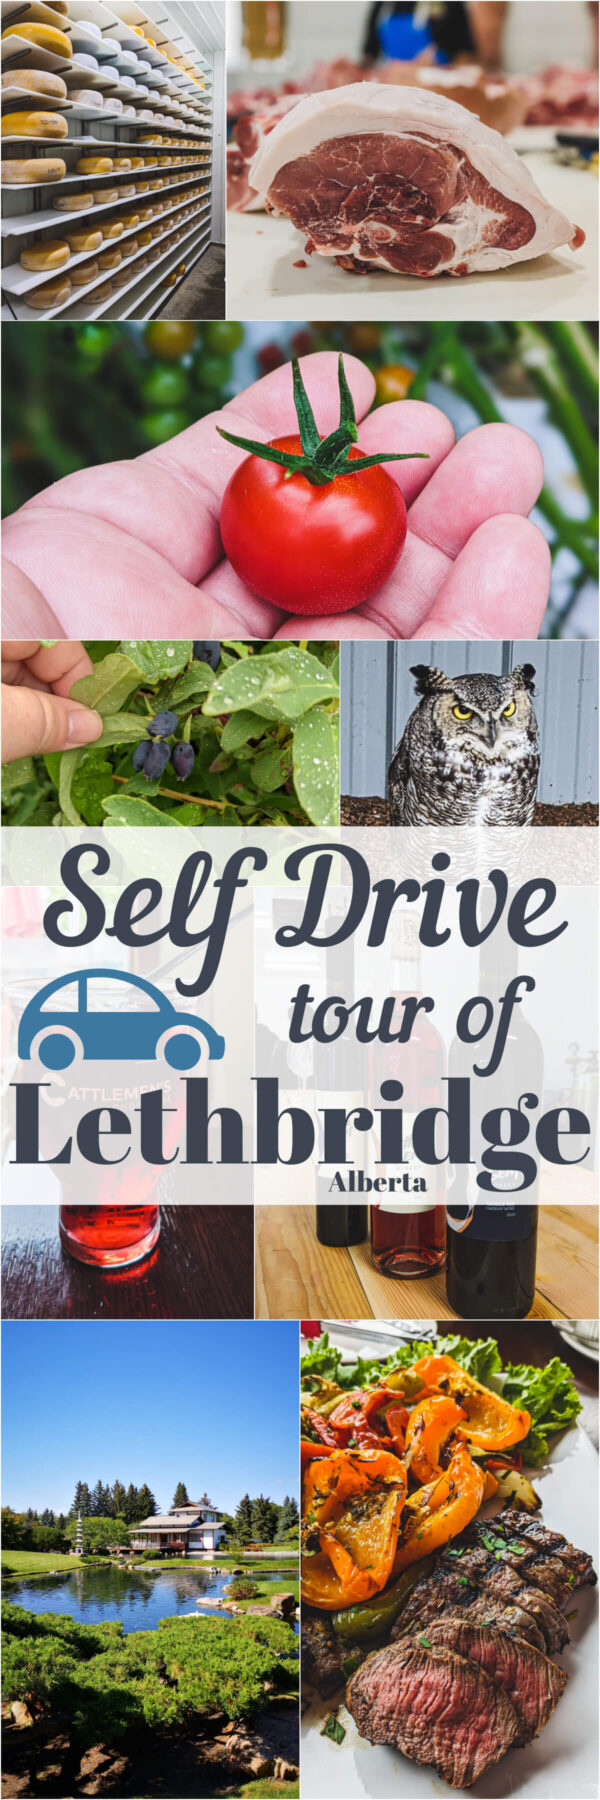 Pinterest image containing multiple images of stops along a self drive tour of Lethbridge and area.